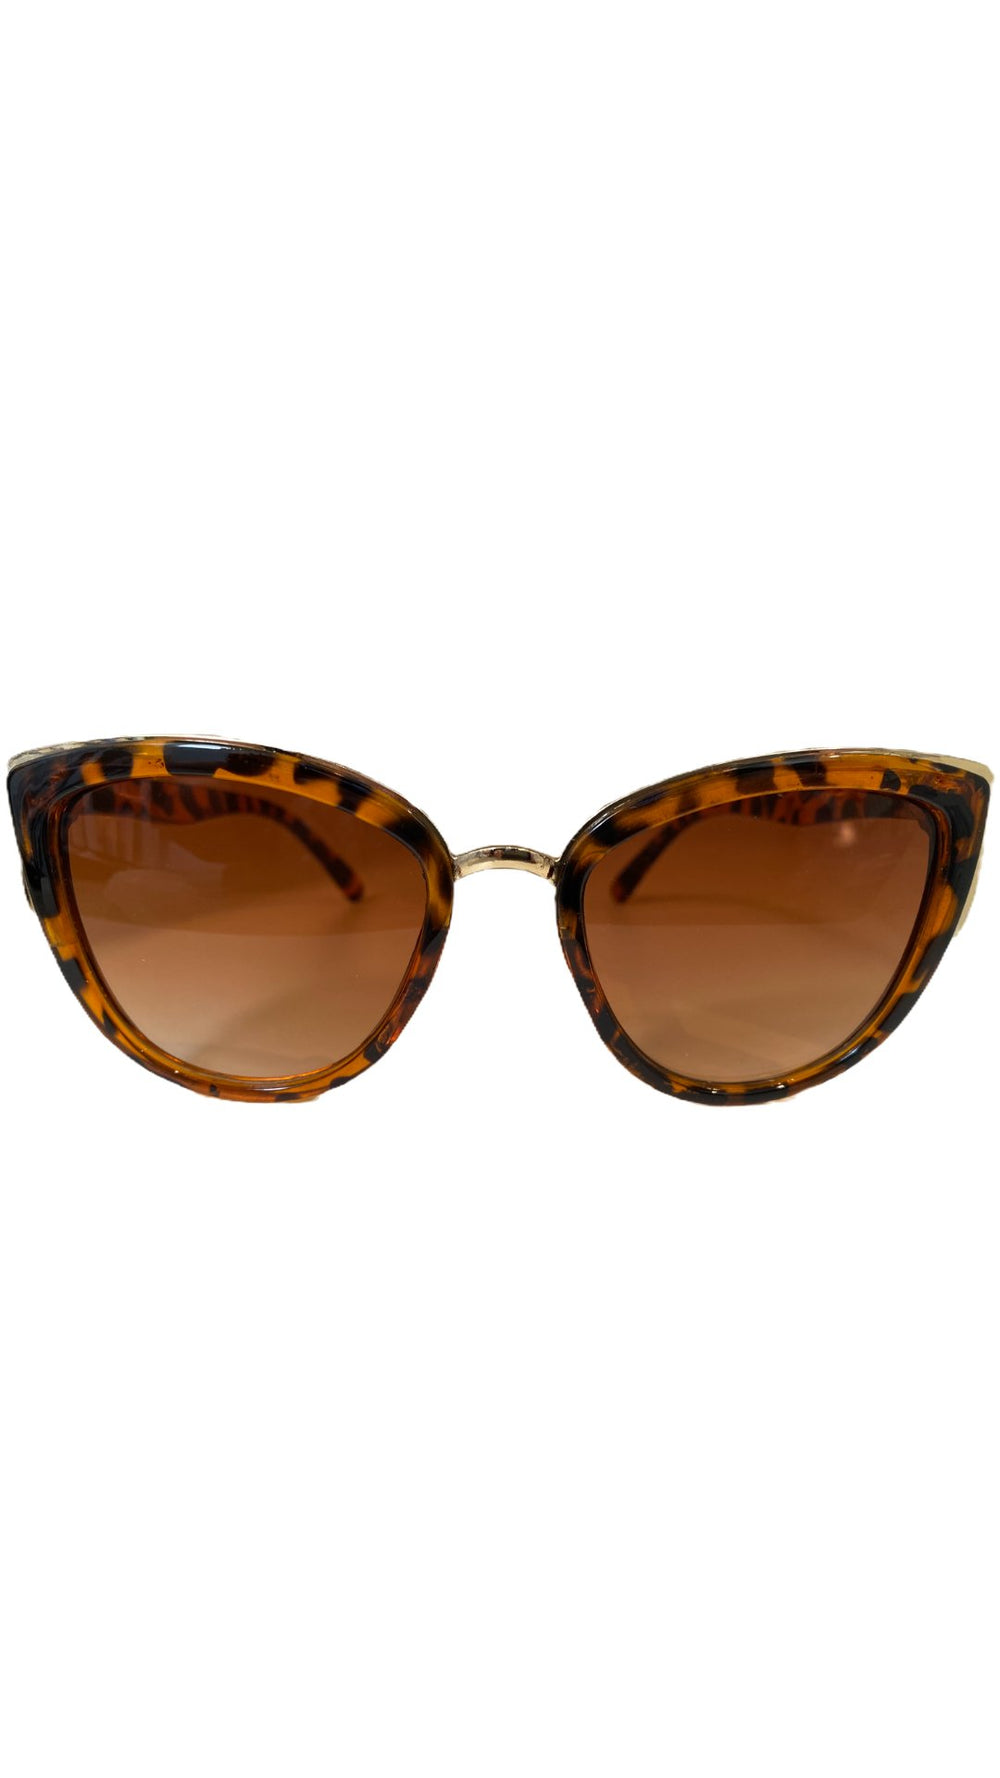 Cheetah Cat Eyes Sunglasses - Polarized Acetate Frame Glasses - Eques Timepieces